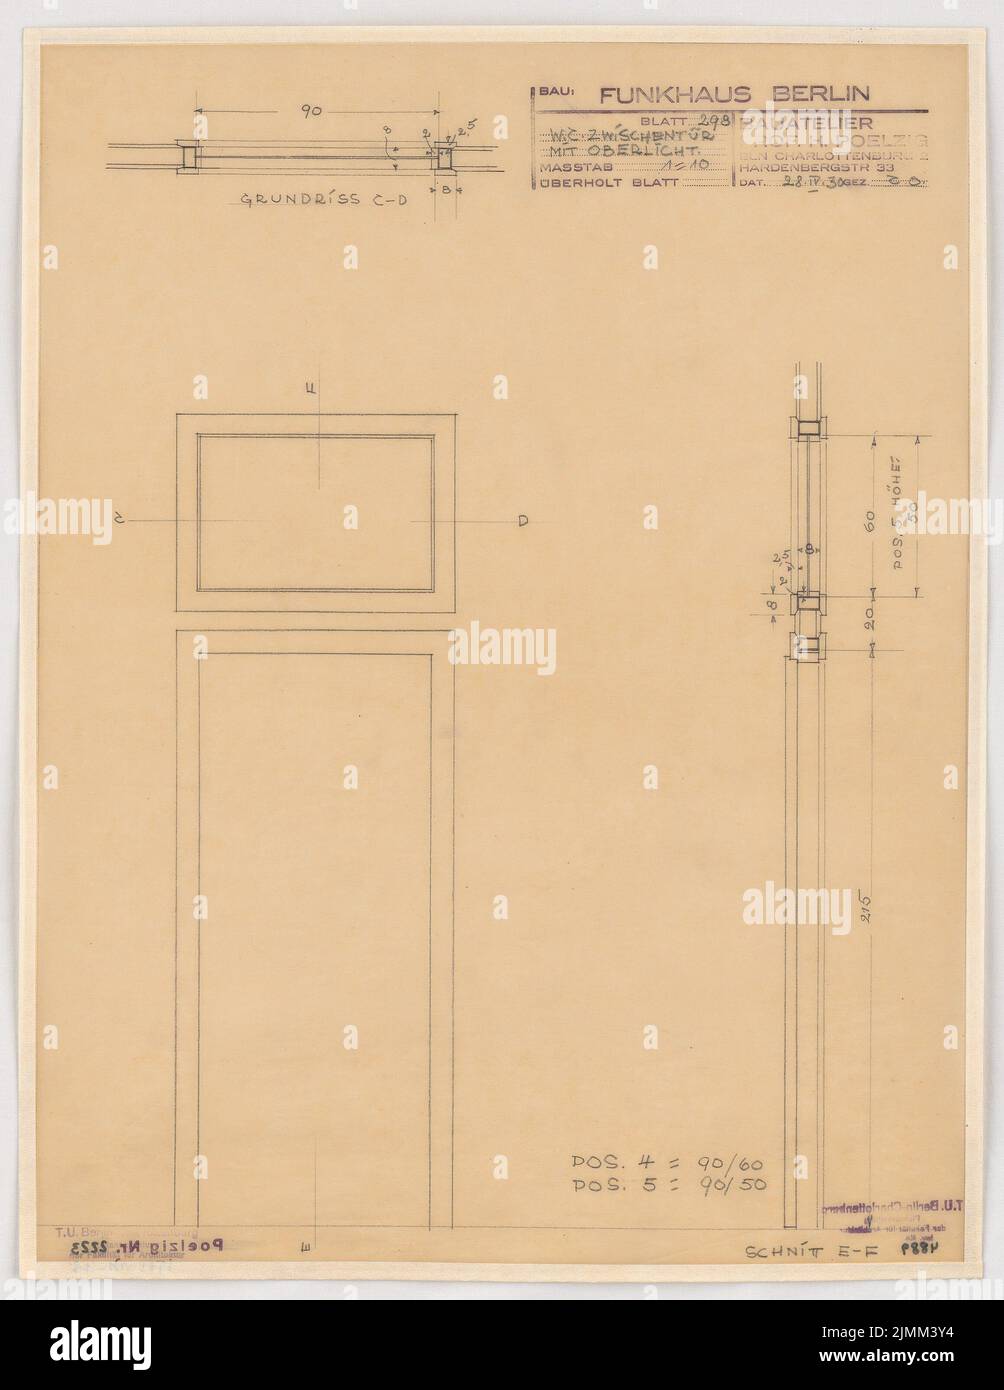 Poelzig Hans (1869-1936), Haus des Rundfunk, Berlin (28.04.1930): Execution project, toilet-wiper door with skylight items 4 and 5, tort, floor plan, cut 1:10. Pencil on transparent, 48.4 x 37.4 cm (including scan edges) Stock Photo